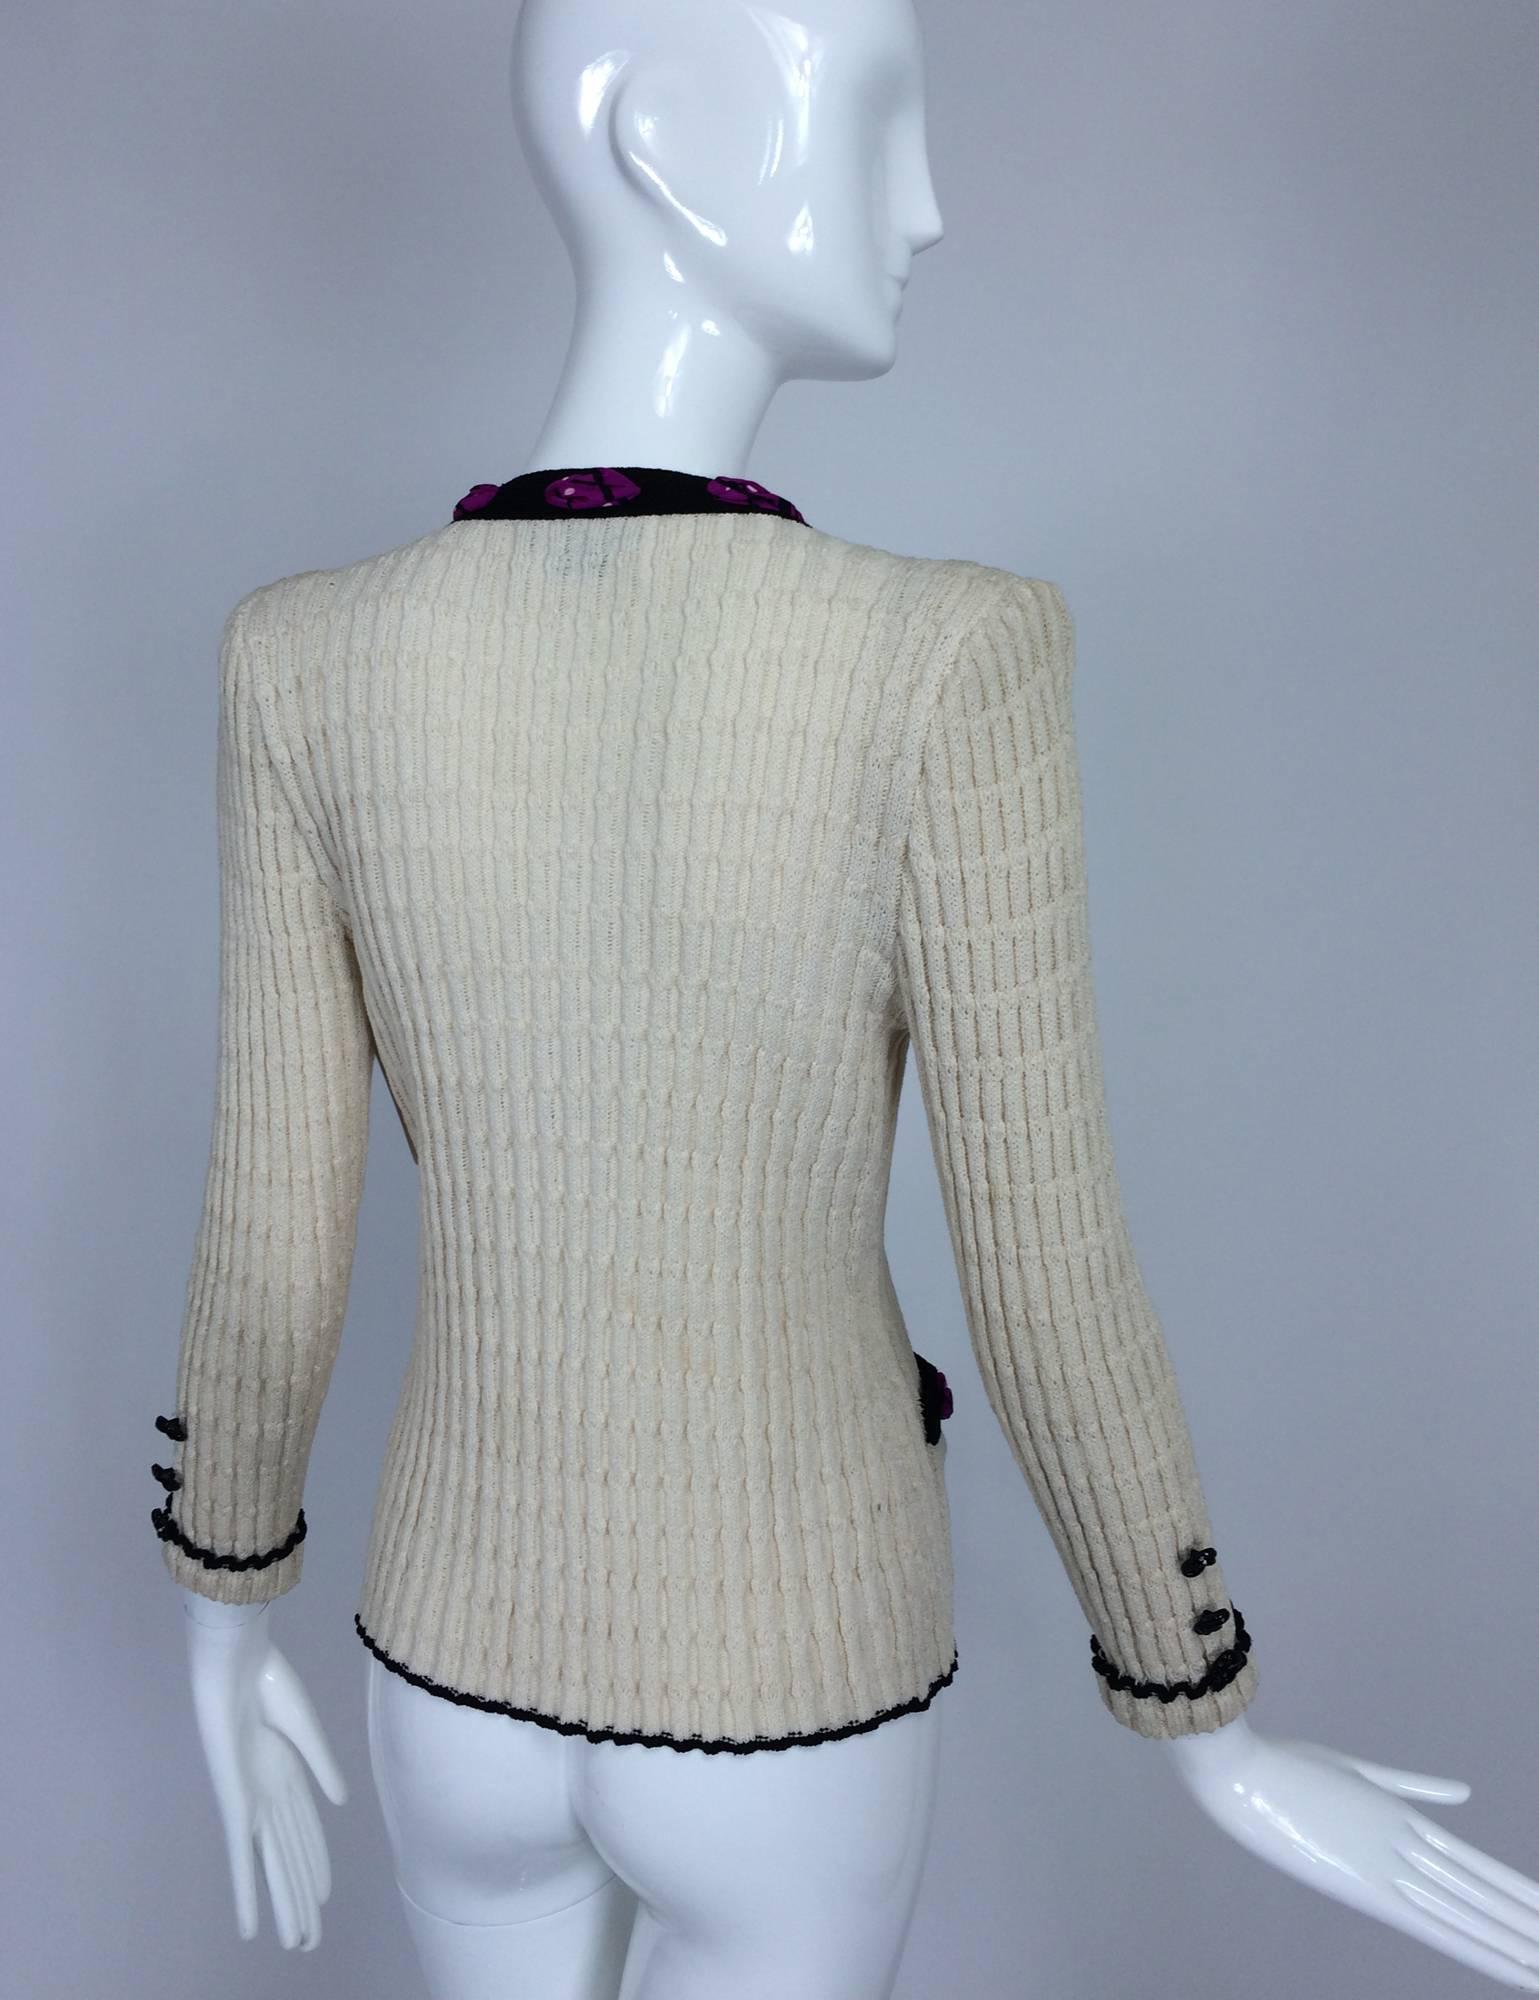 Women's Adolfo cream cable knit rosette trimmed cardigan sweater/jacket 1970s